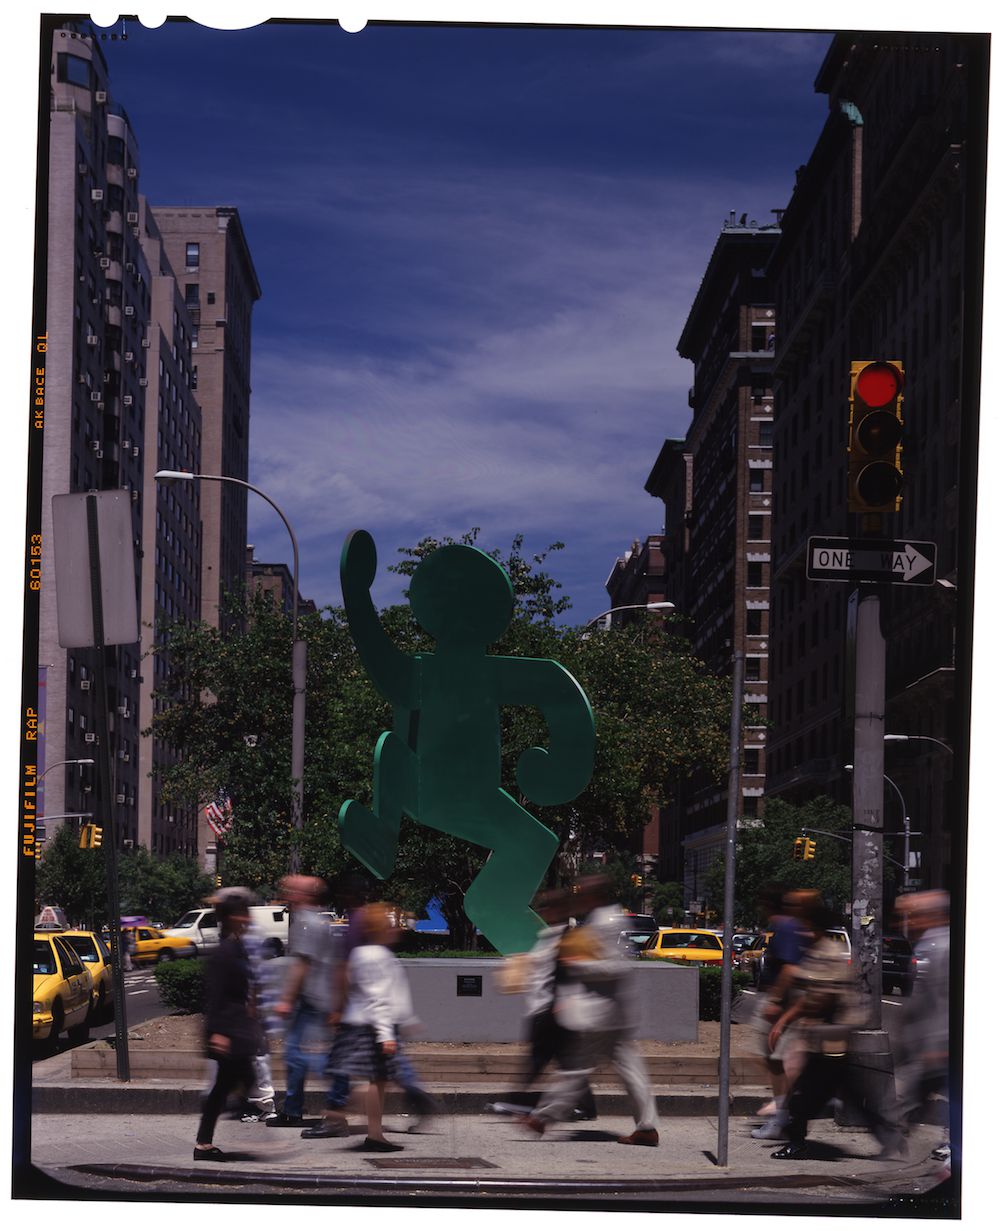 Keith Haring, Self Portrait, 1997, Park Avenue Malls, Manhattan, Courtesy of the Public Art Fund, Photo by Frederick Charles<br/>